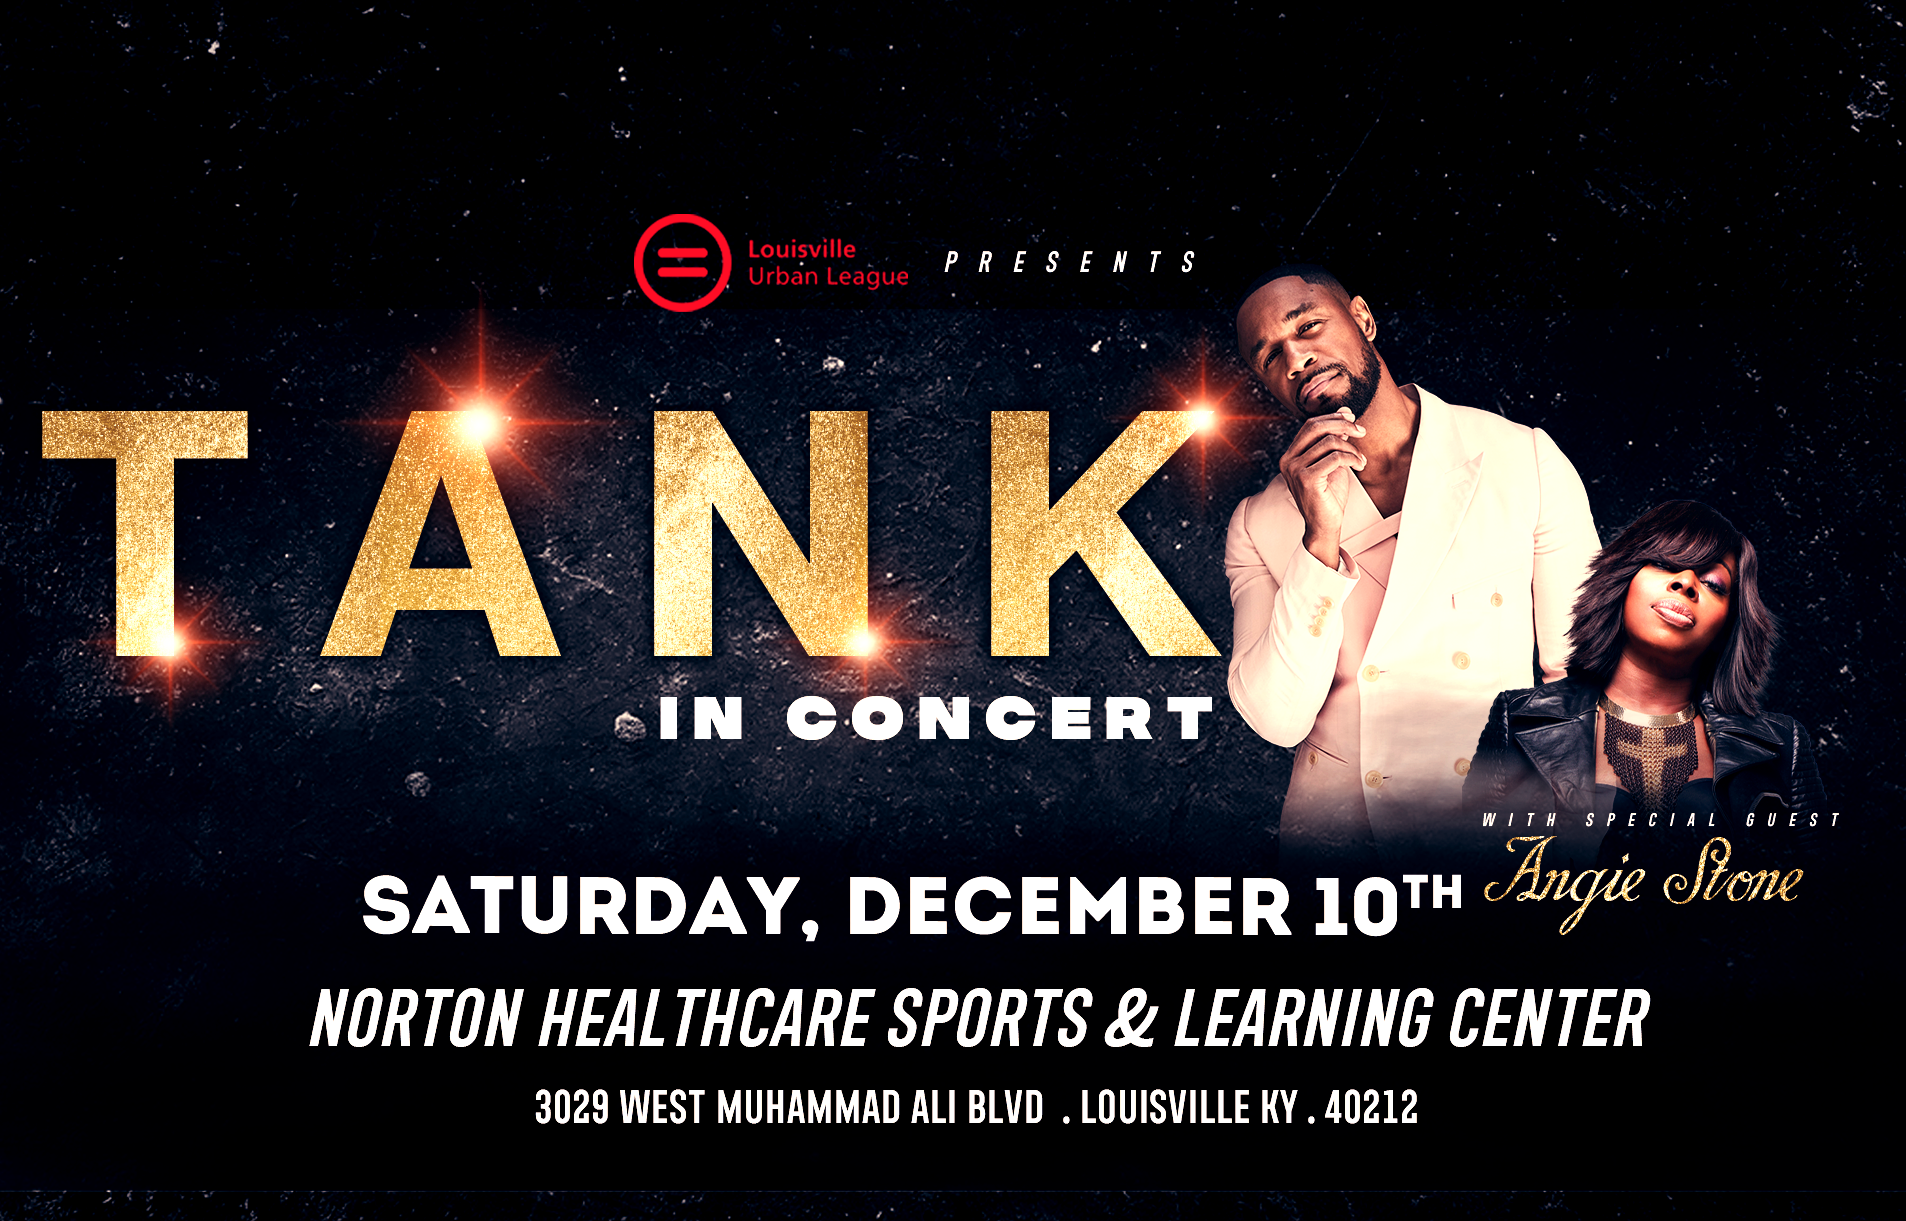 More Info for Tank and Angie Stone Live in Concert